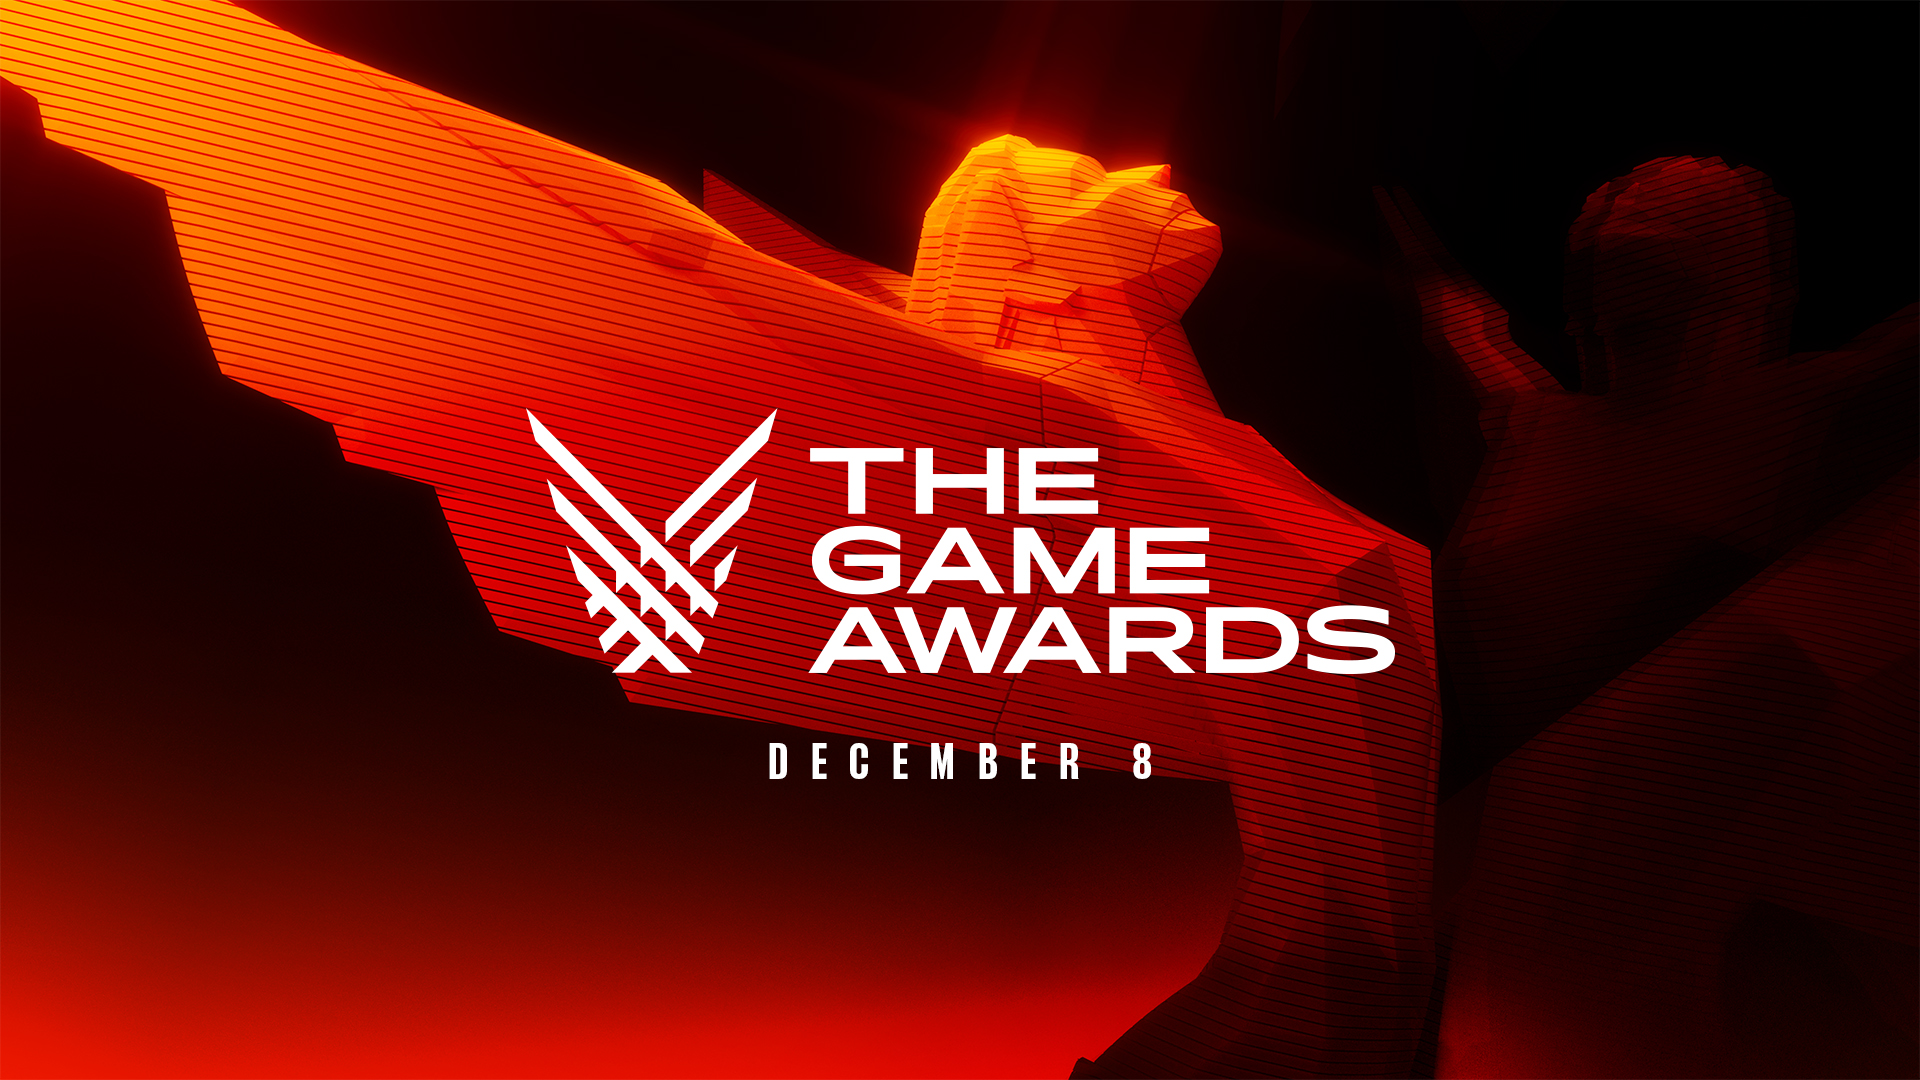 The Game Awards 2022 is Shorter in Comparison to the Previous Year